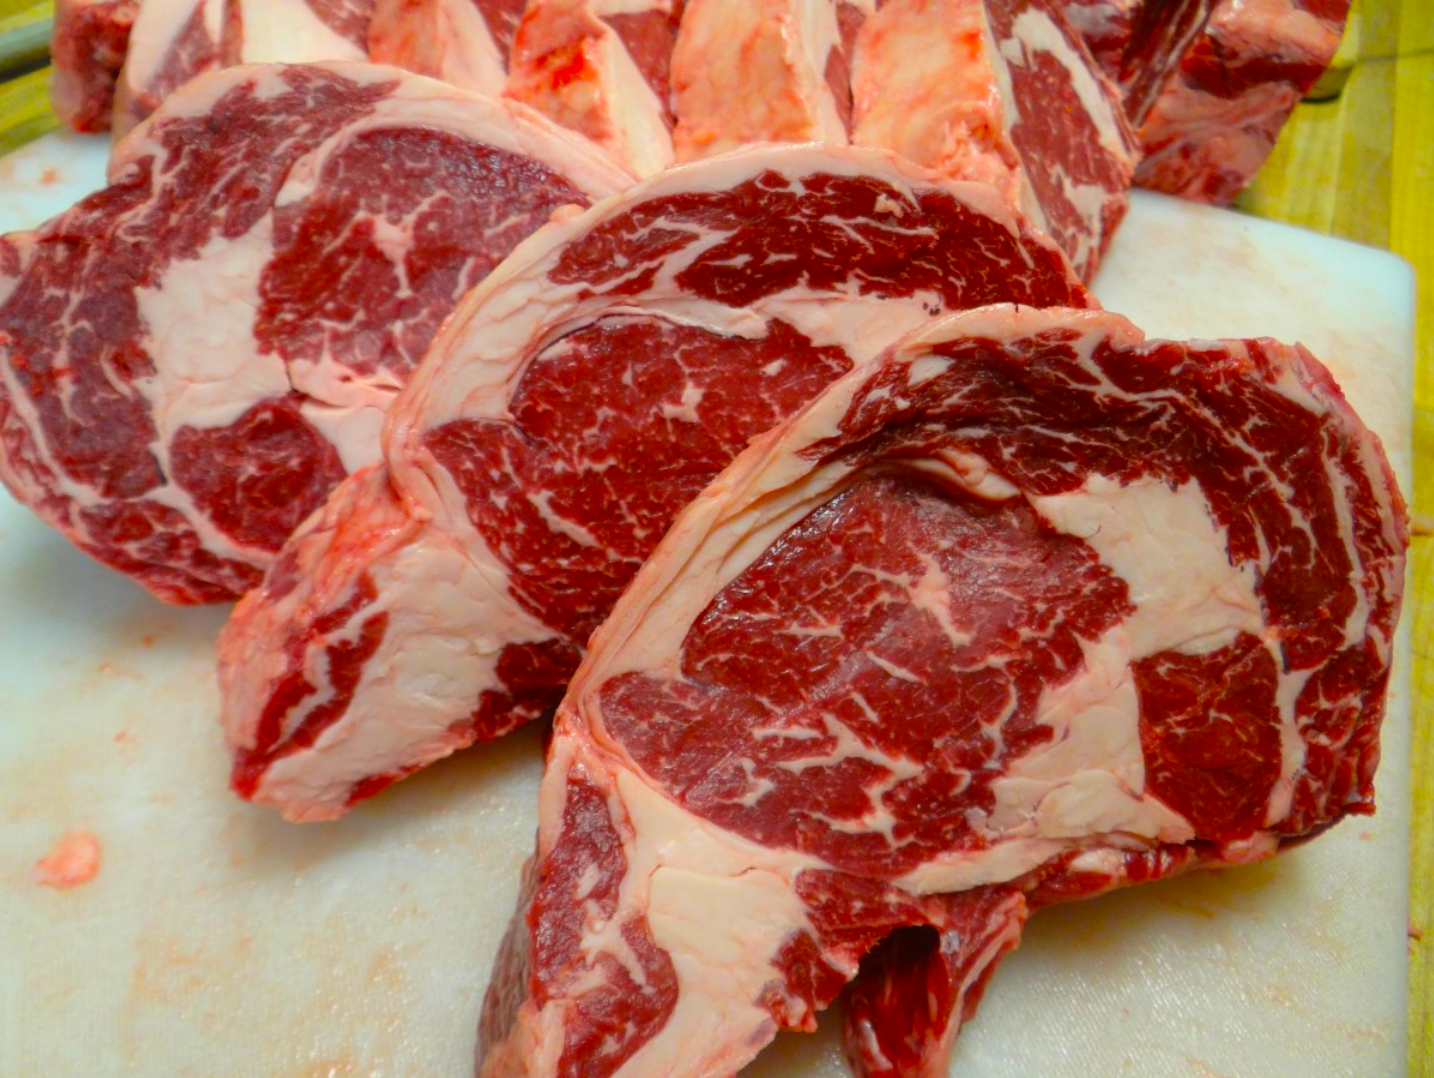 Animal Justice Cfia Cracks Down On Meat Cut Mislabelling But